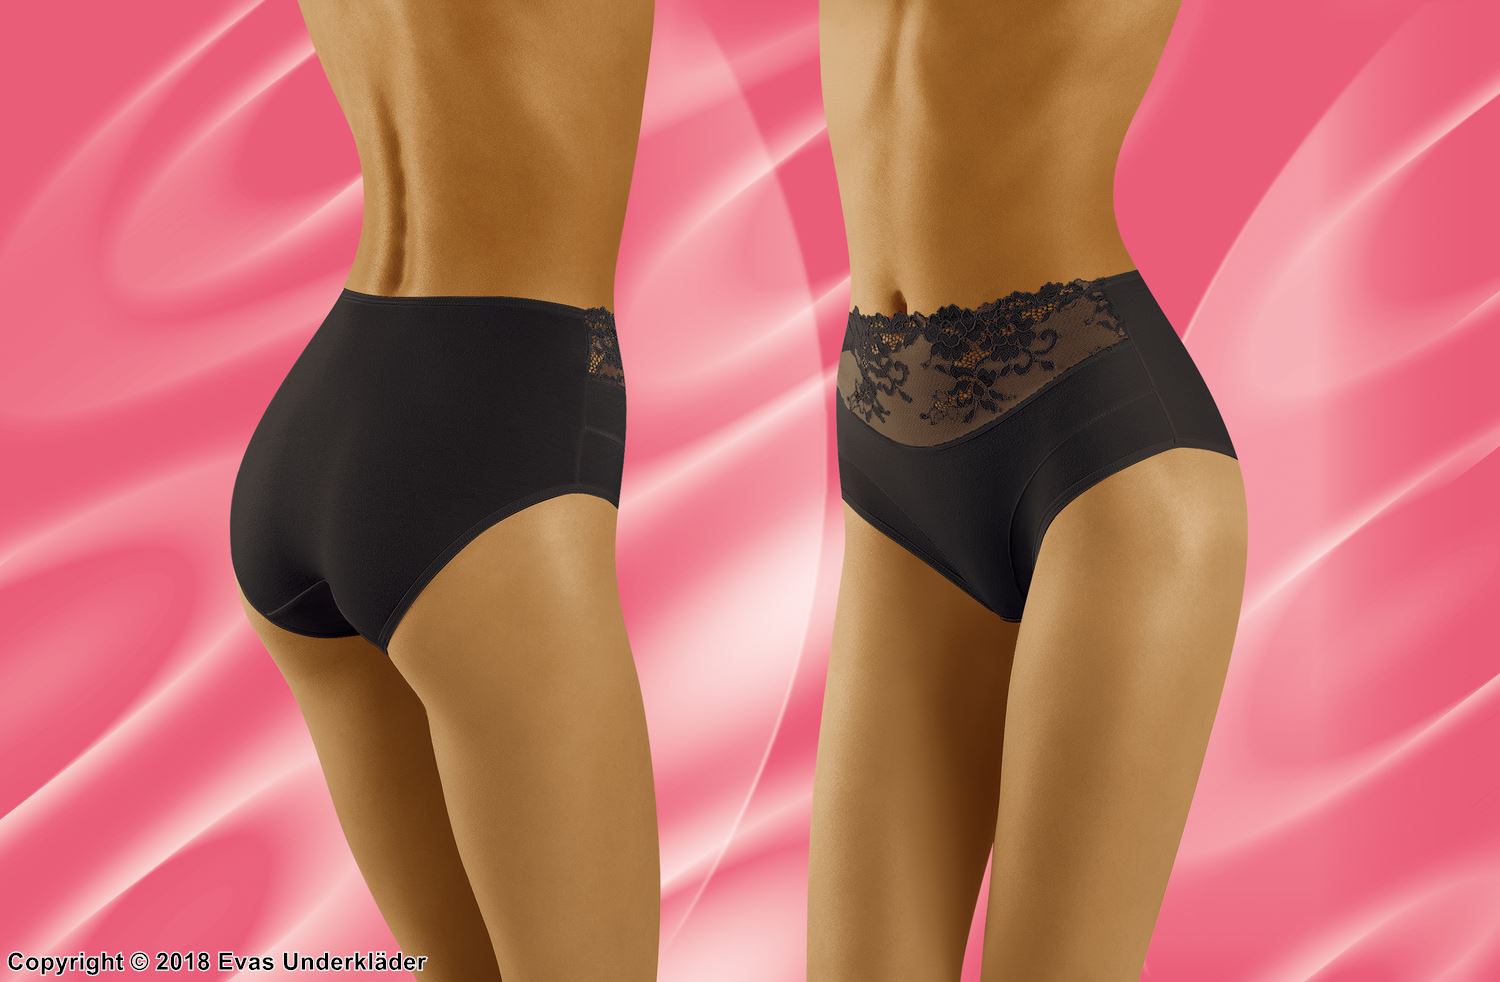 Beautiful maxi briefs, slightly higher waist, partially lace front